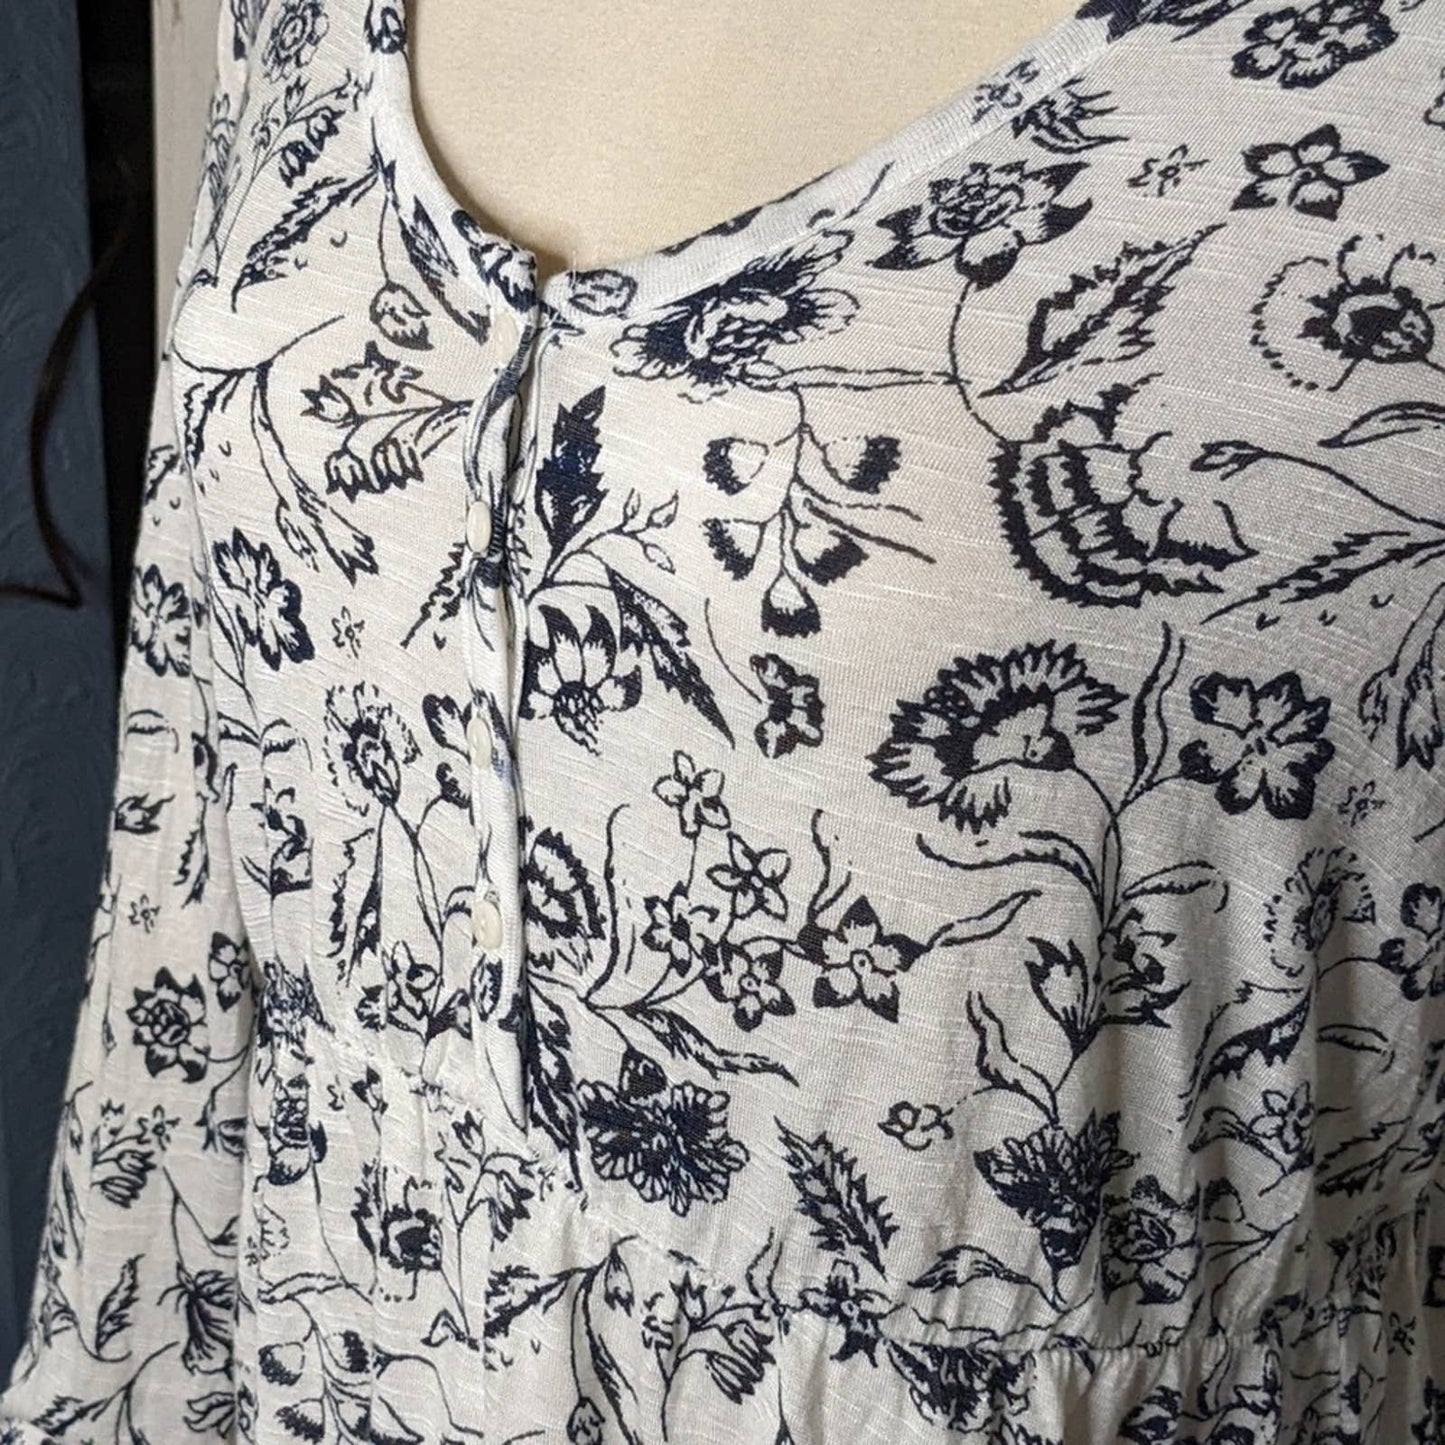 LUCKY BRAND White Navy Floral Button V-Neck Top Cinched Waist XS